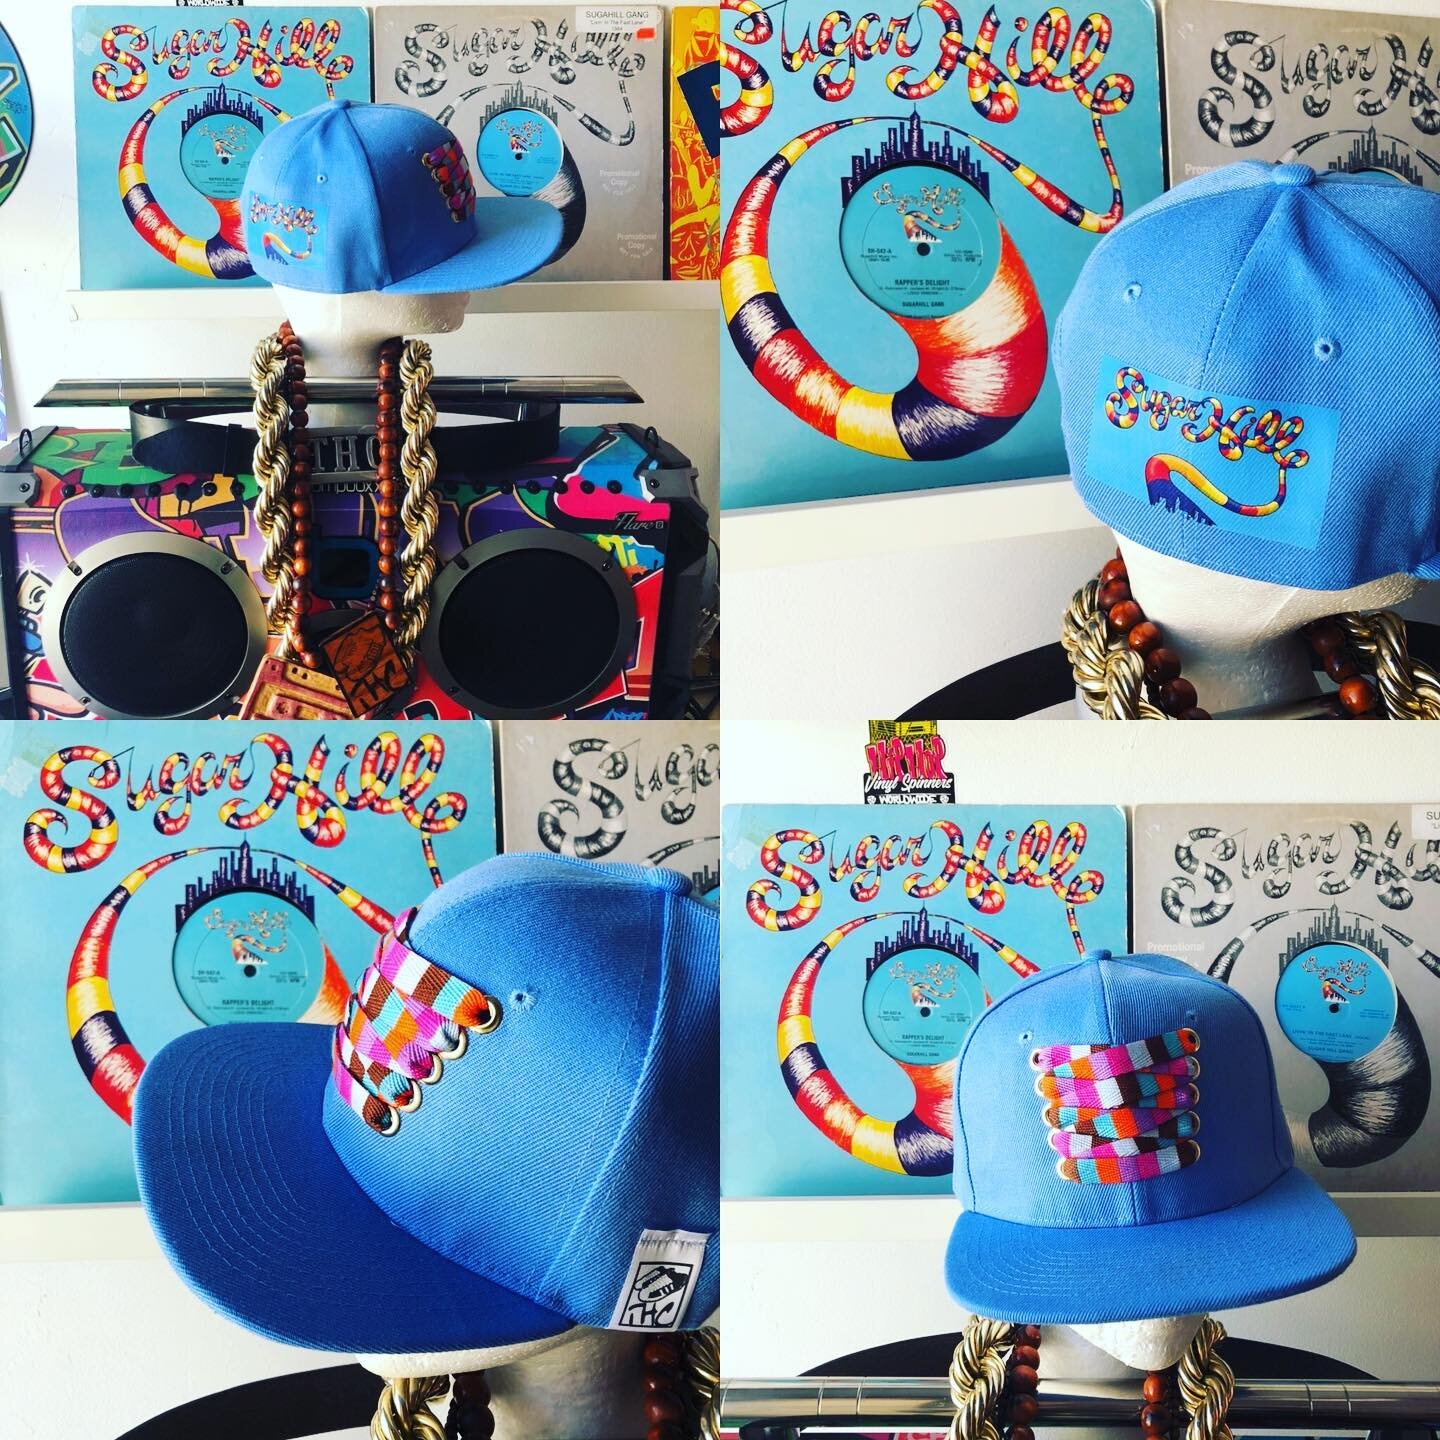 Now what you see is not a test, 
I&rsquo;m lacing to the beat...
The hit record that introduced the underground culture of hip-hop to the mainstream at the end of 1979. Nuff said. Custom sky blue snapback remixed with gold eyelets and rainbow lace to